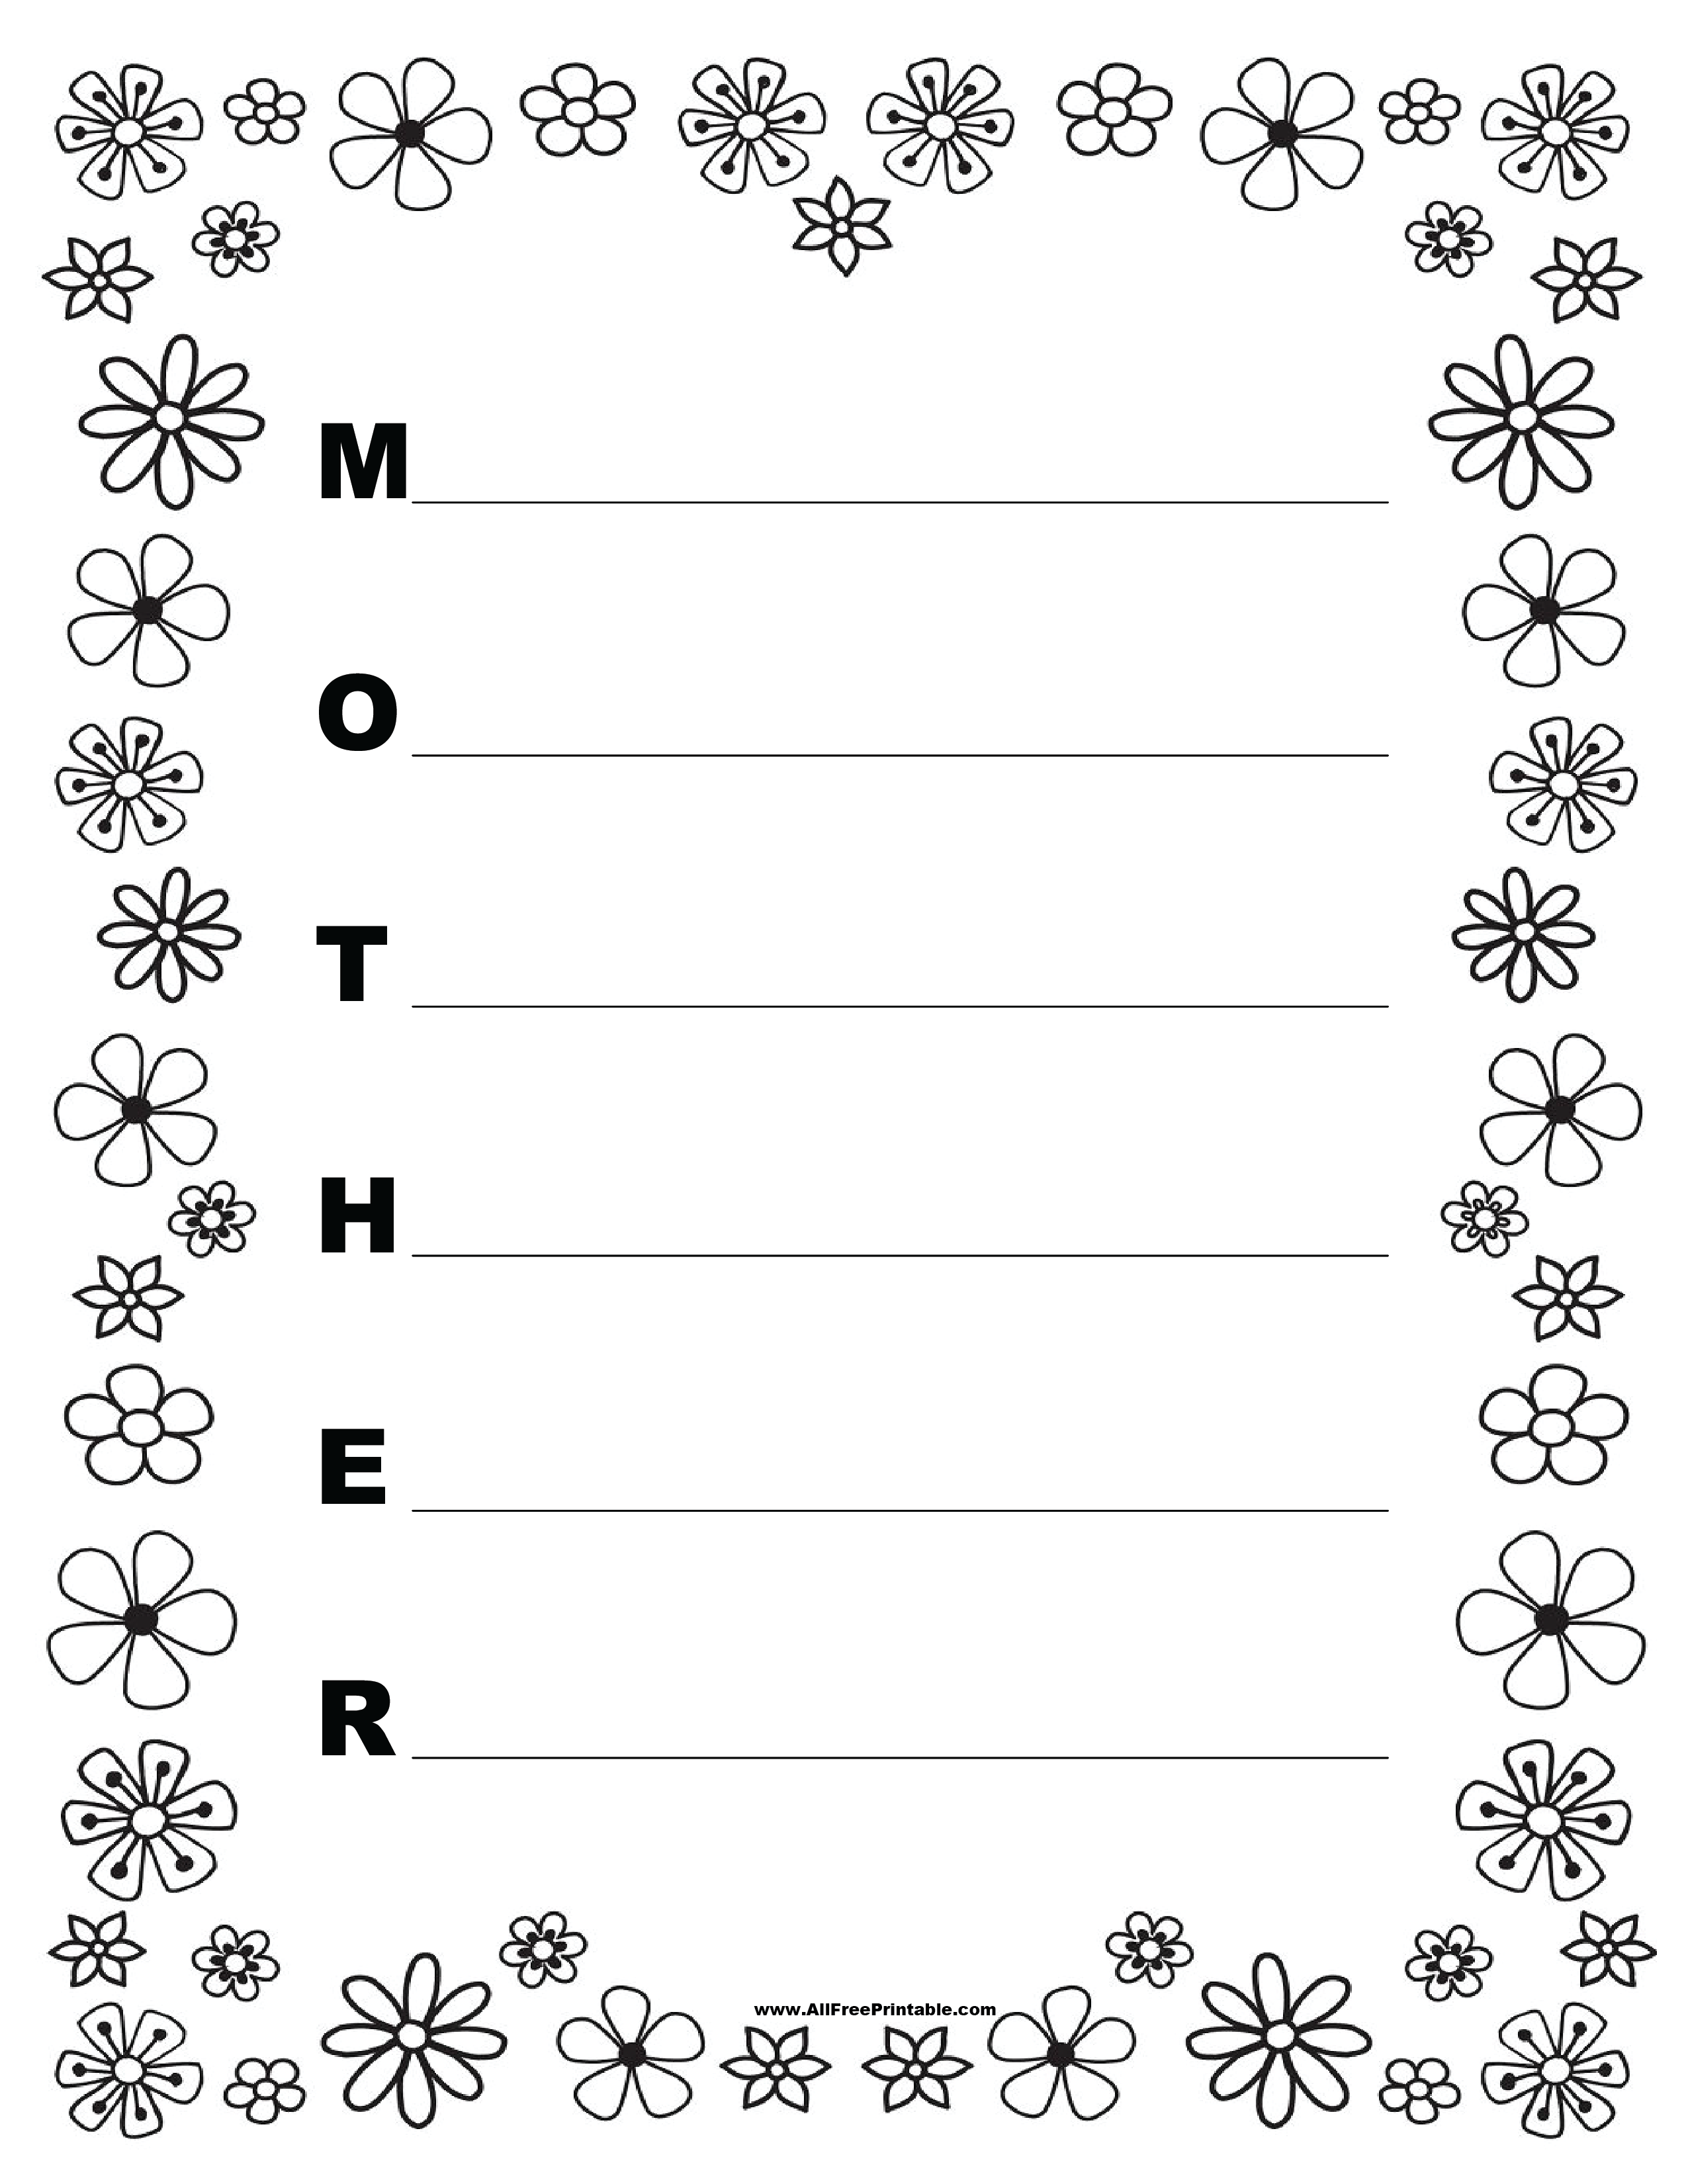 mothers-day-downloads-06